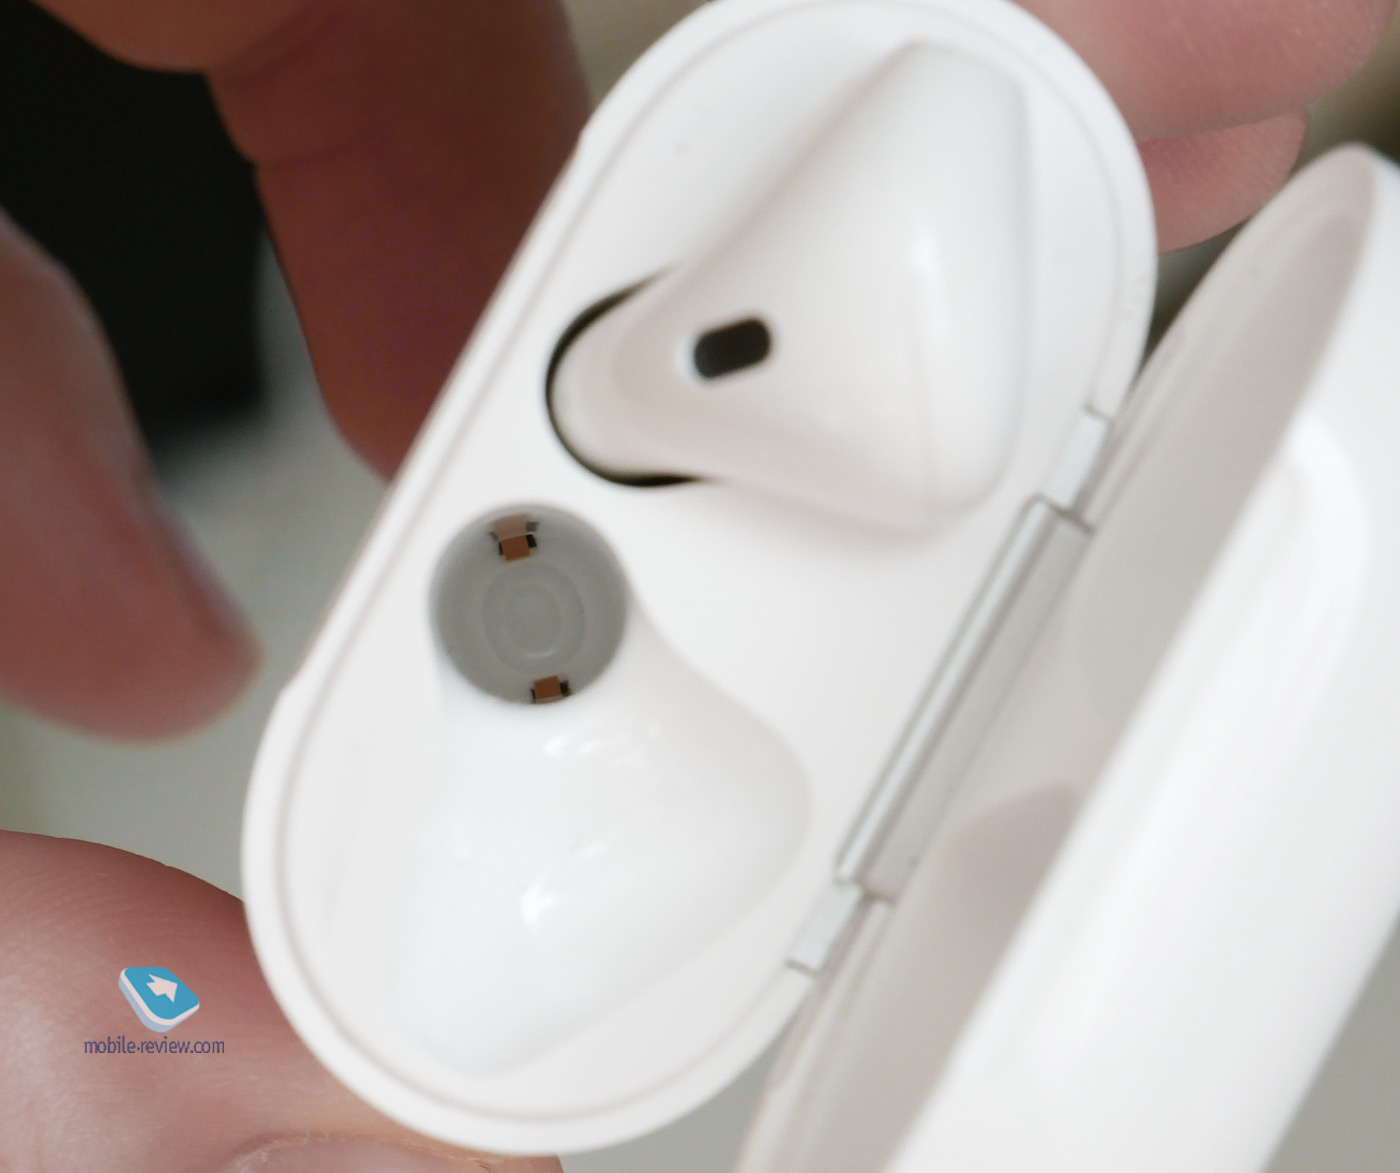   Apple AirPods  